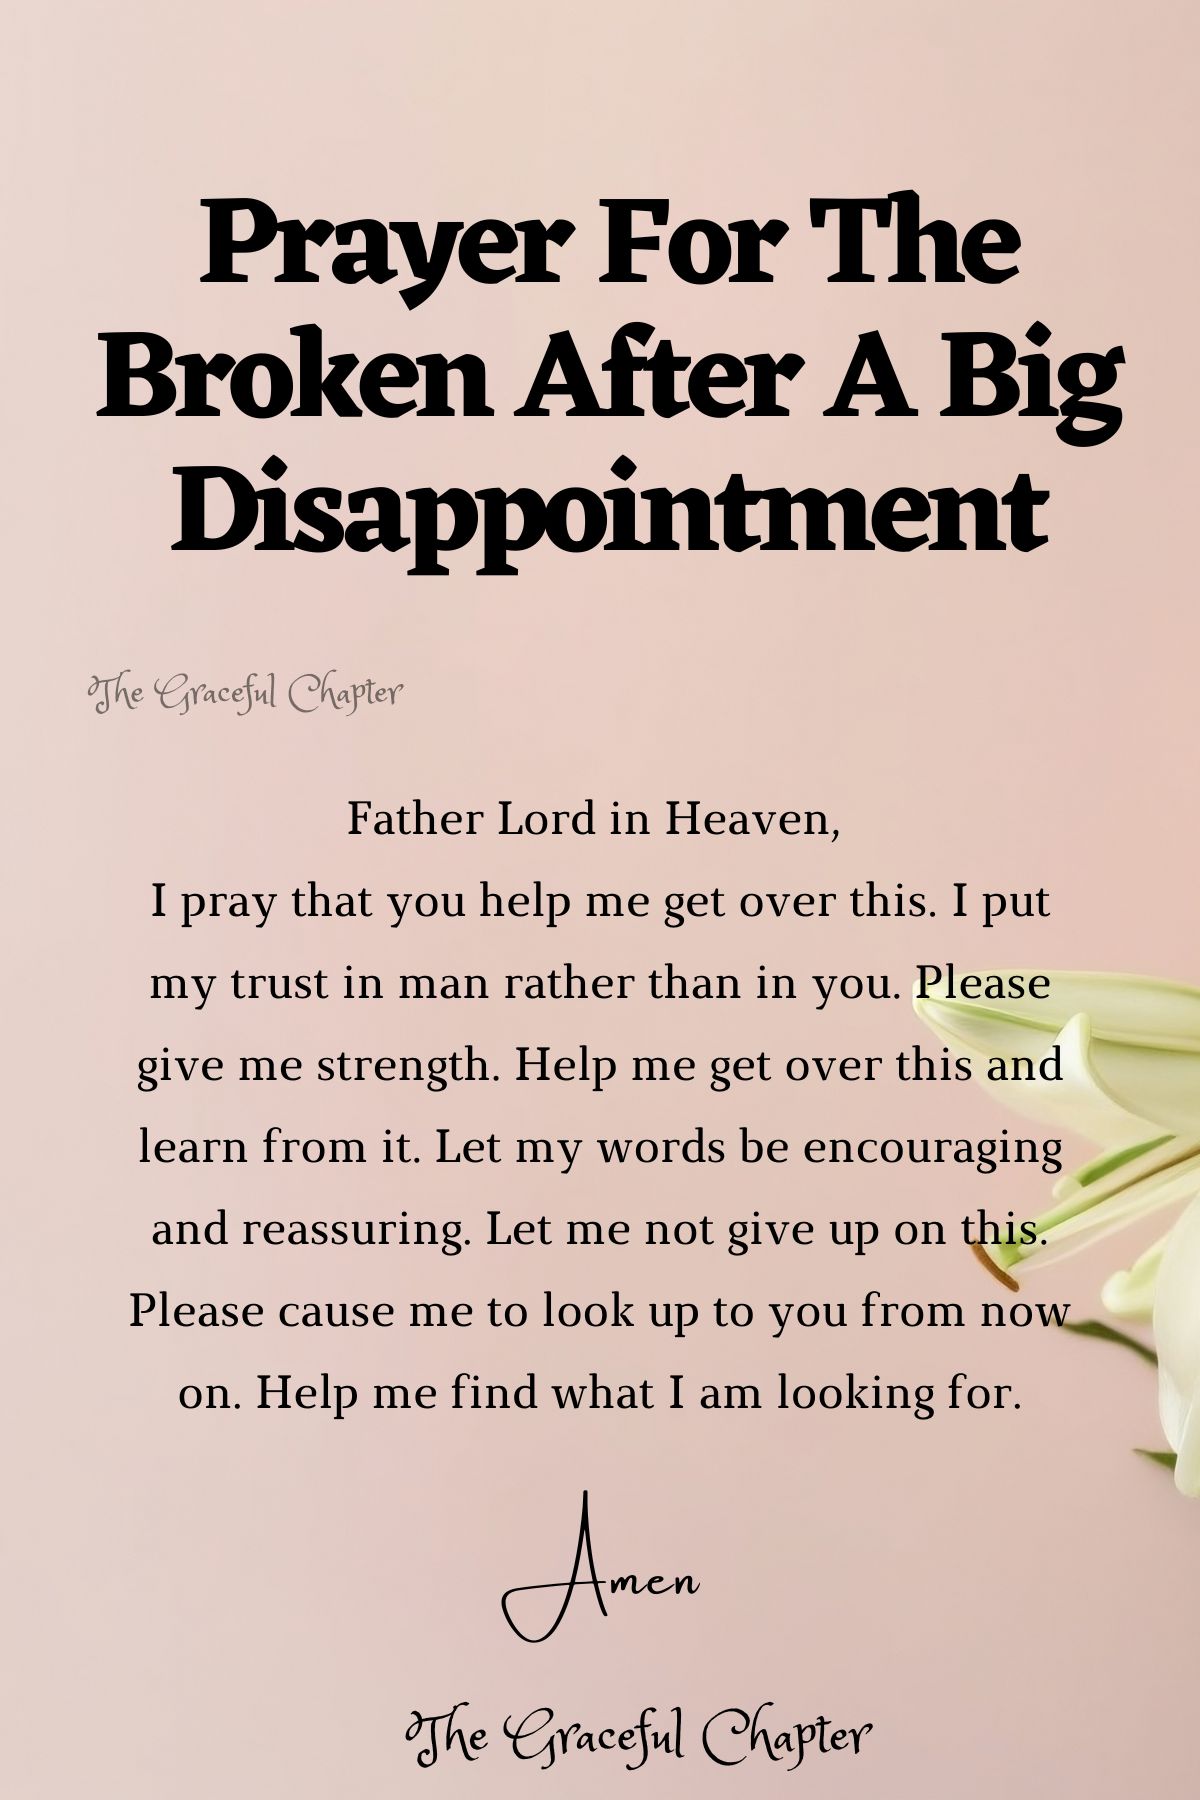 For the broken after a big disappointment